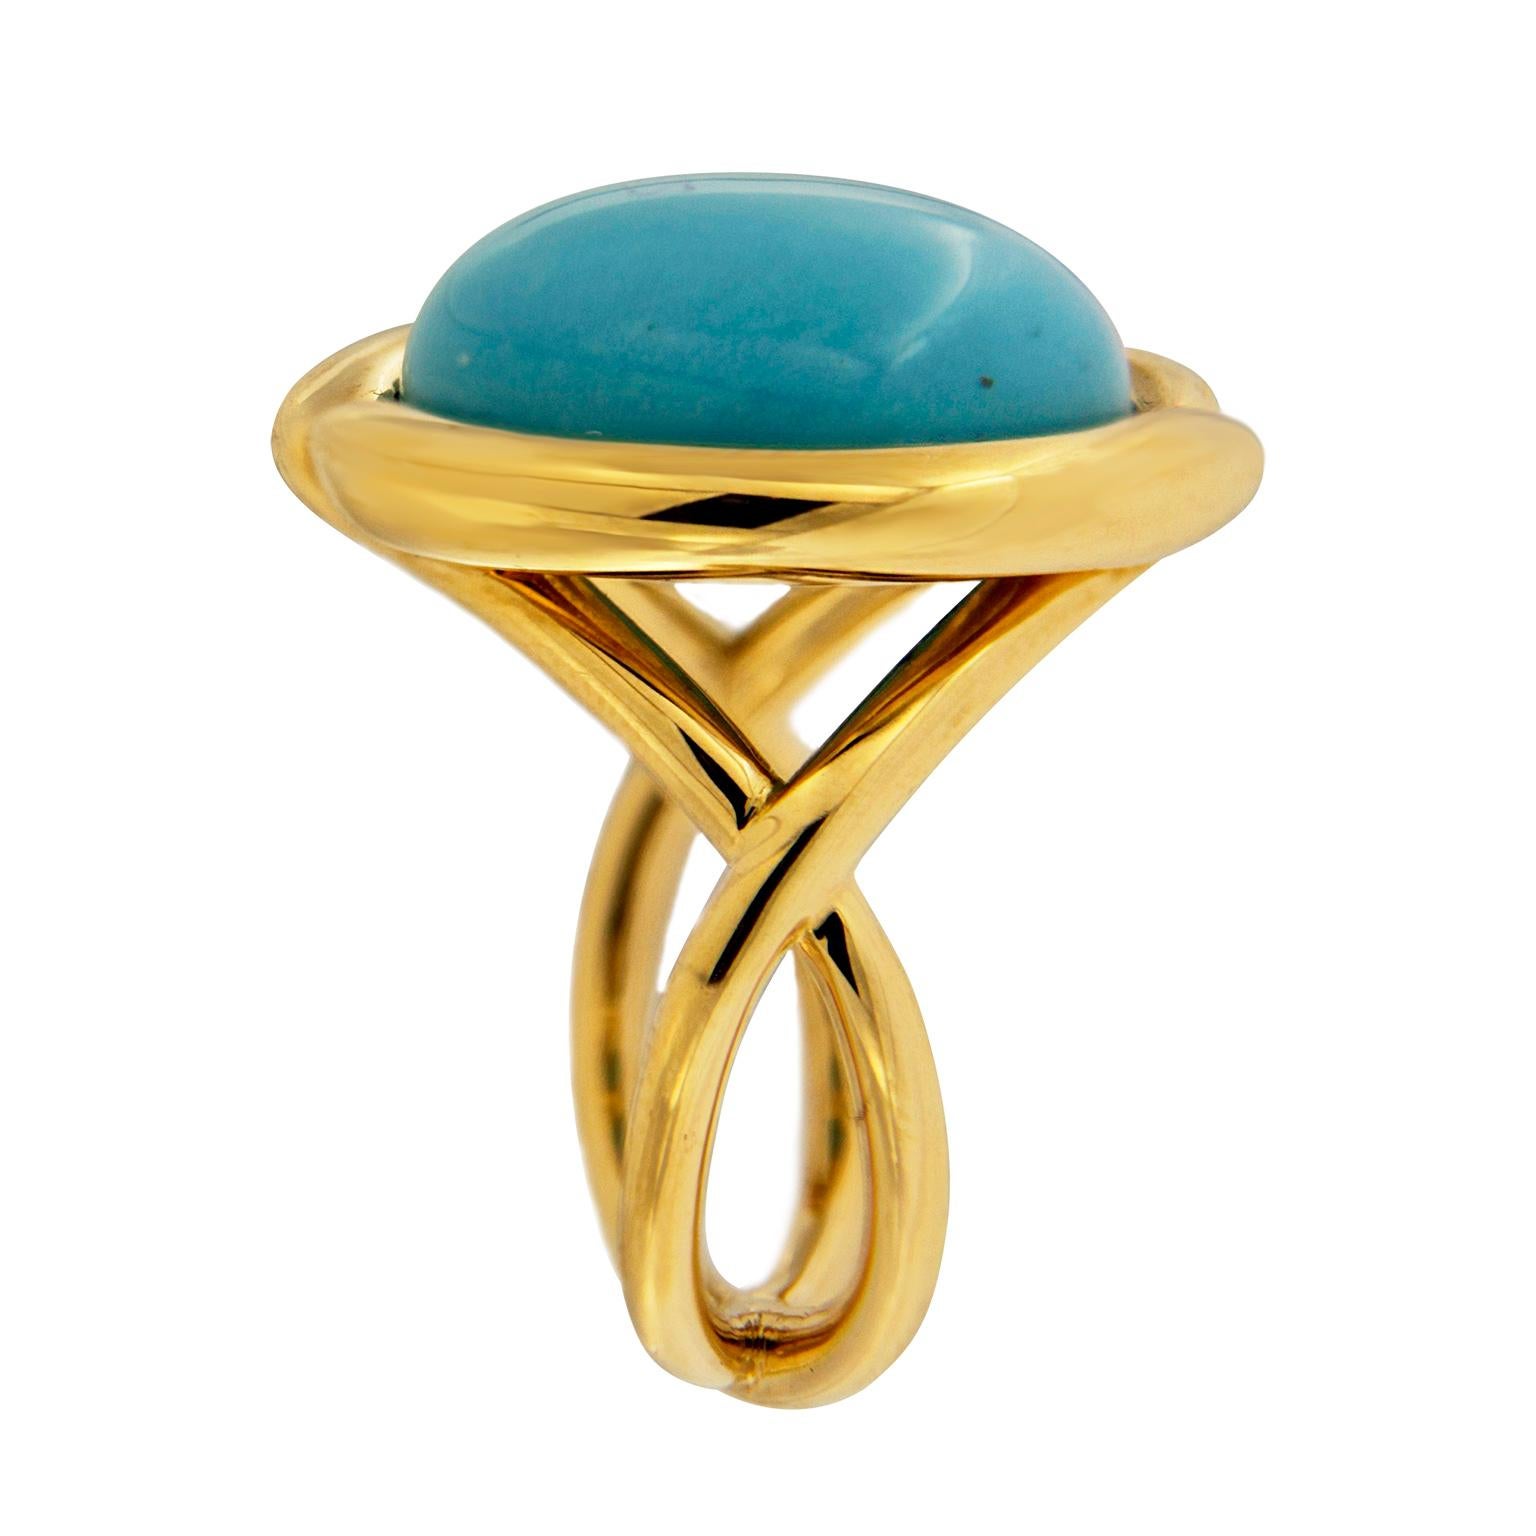 Turquoise takes center stage in this ring created by Valentin Magro. The jewel is carved into a round cabochon and polished smooth. It rests in an 18k yellow gold bezel setting with a subtle overlap motif. A gold double shank supports the stone.